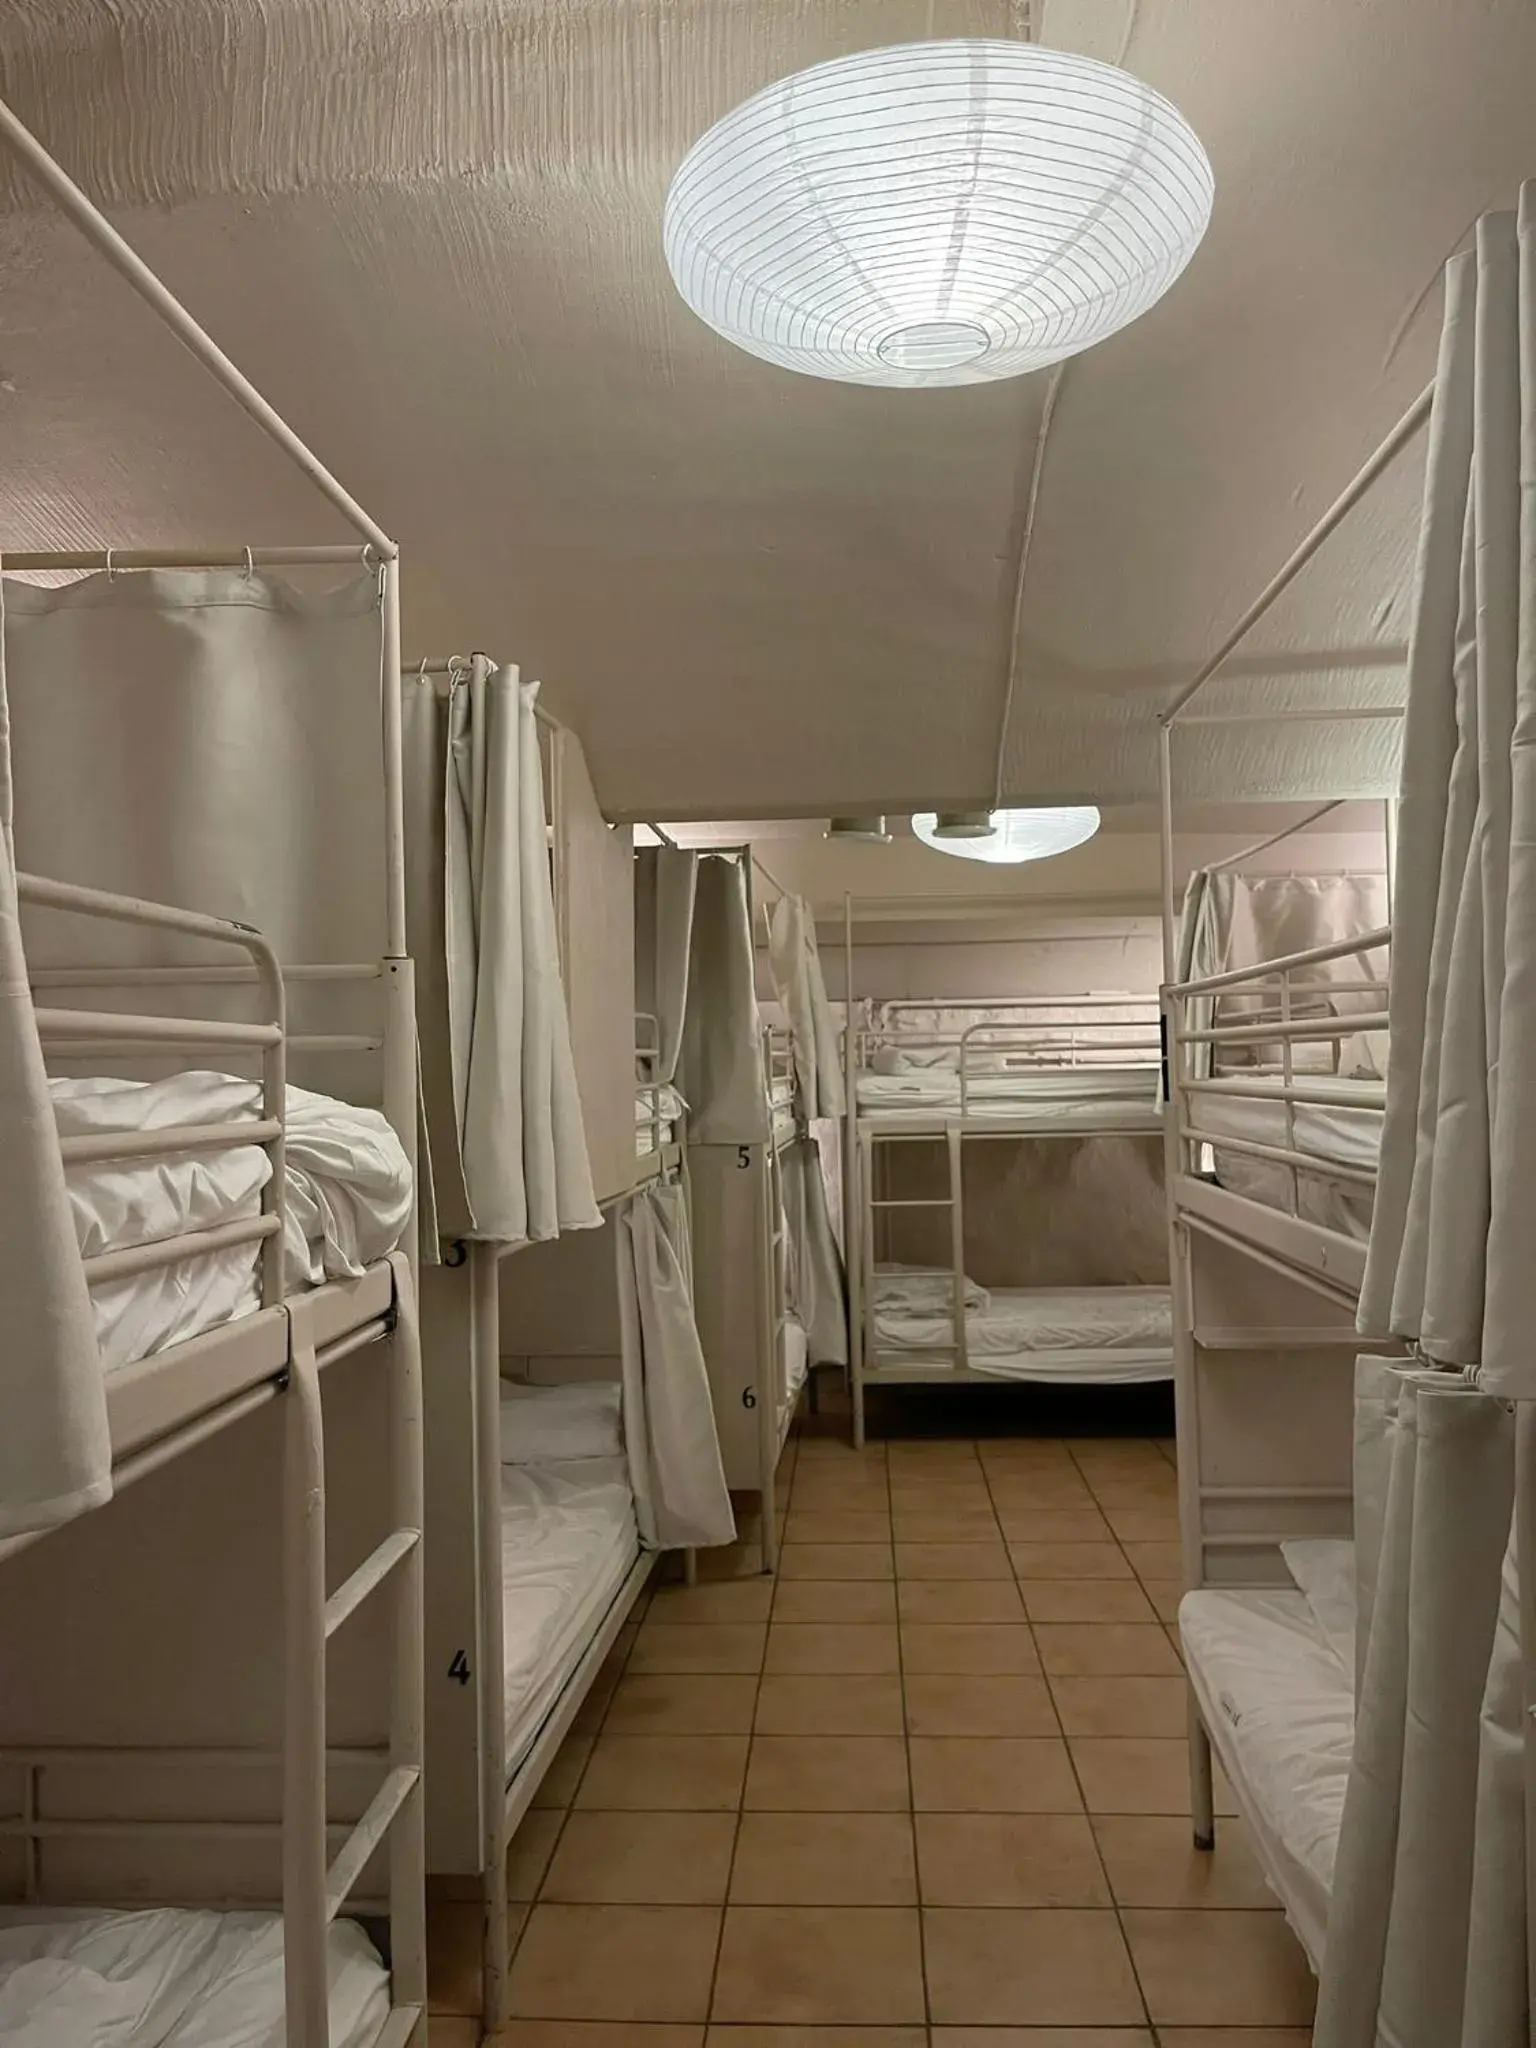 Bed, Bunk Bed in Lodge32